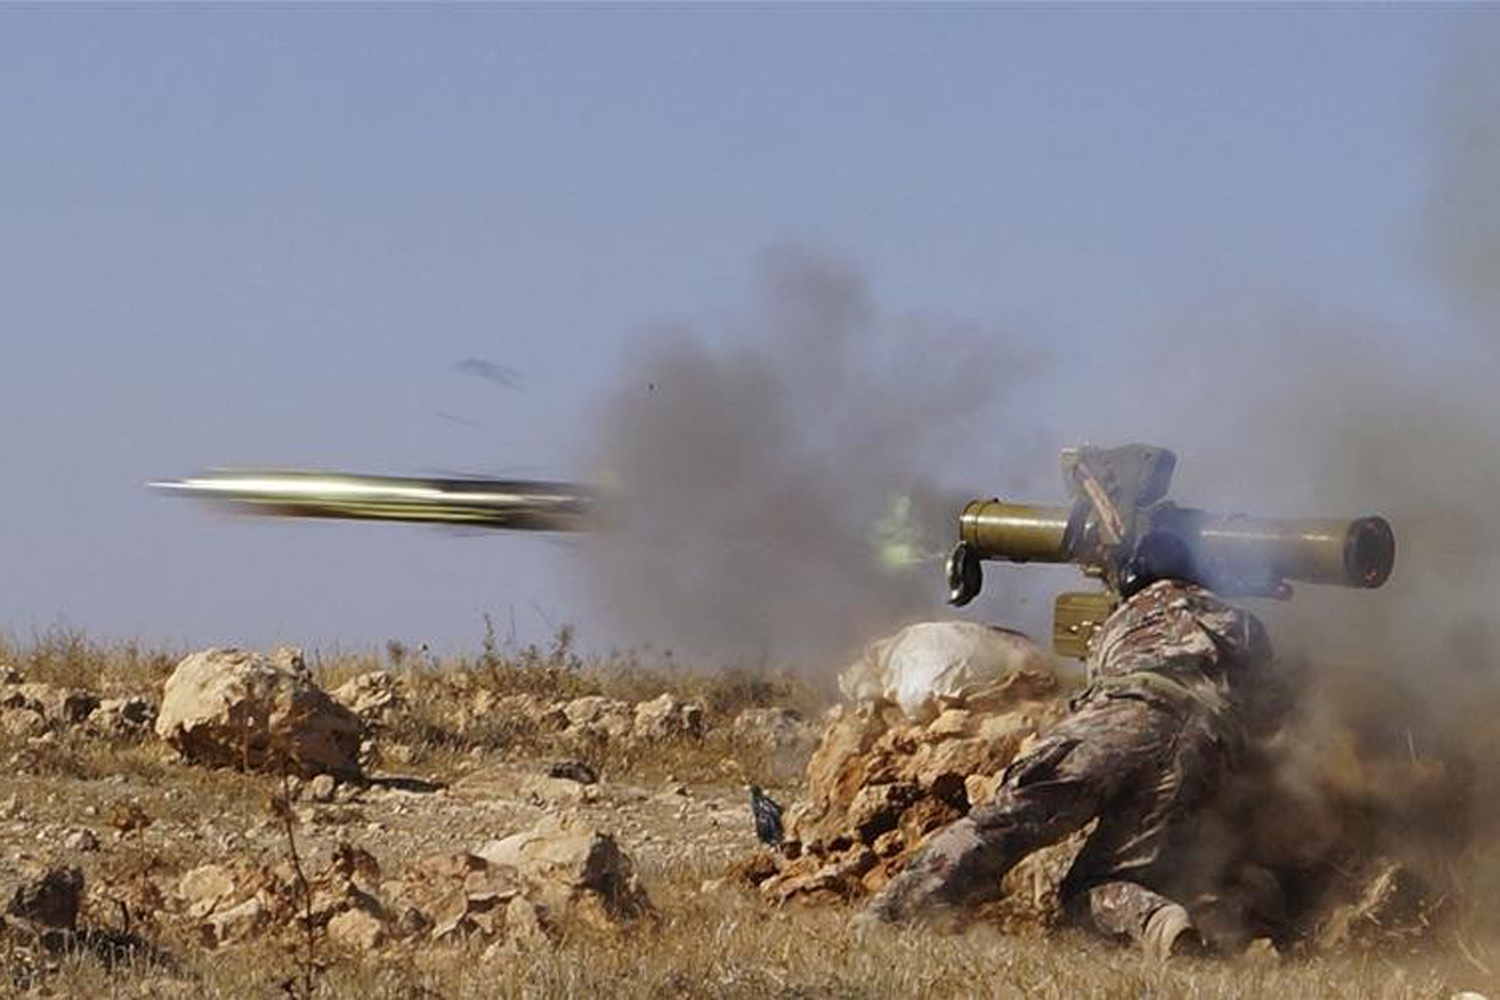 A Free Syrian Army fighter fire an anti-tank missile towards what the FSA said were locations controlled by forces loyal to Syria's President Bashar al-Assad in the eastern Hama countryside